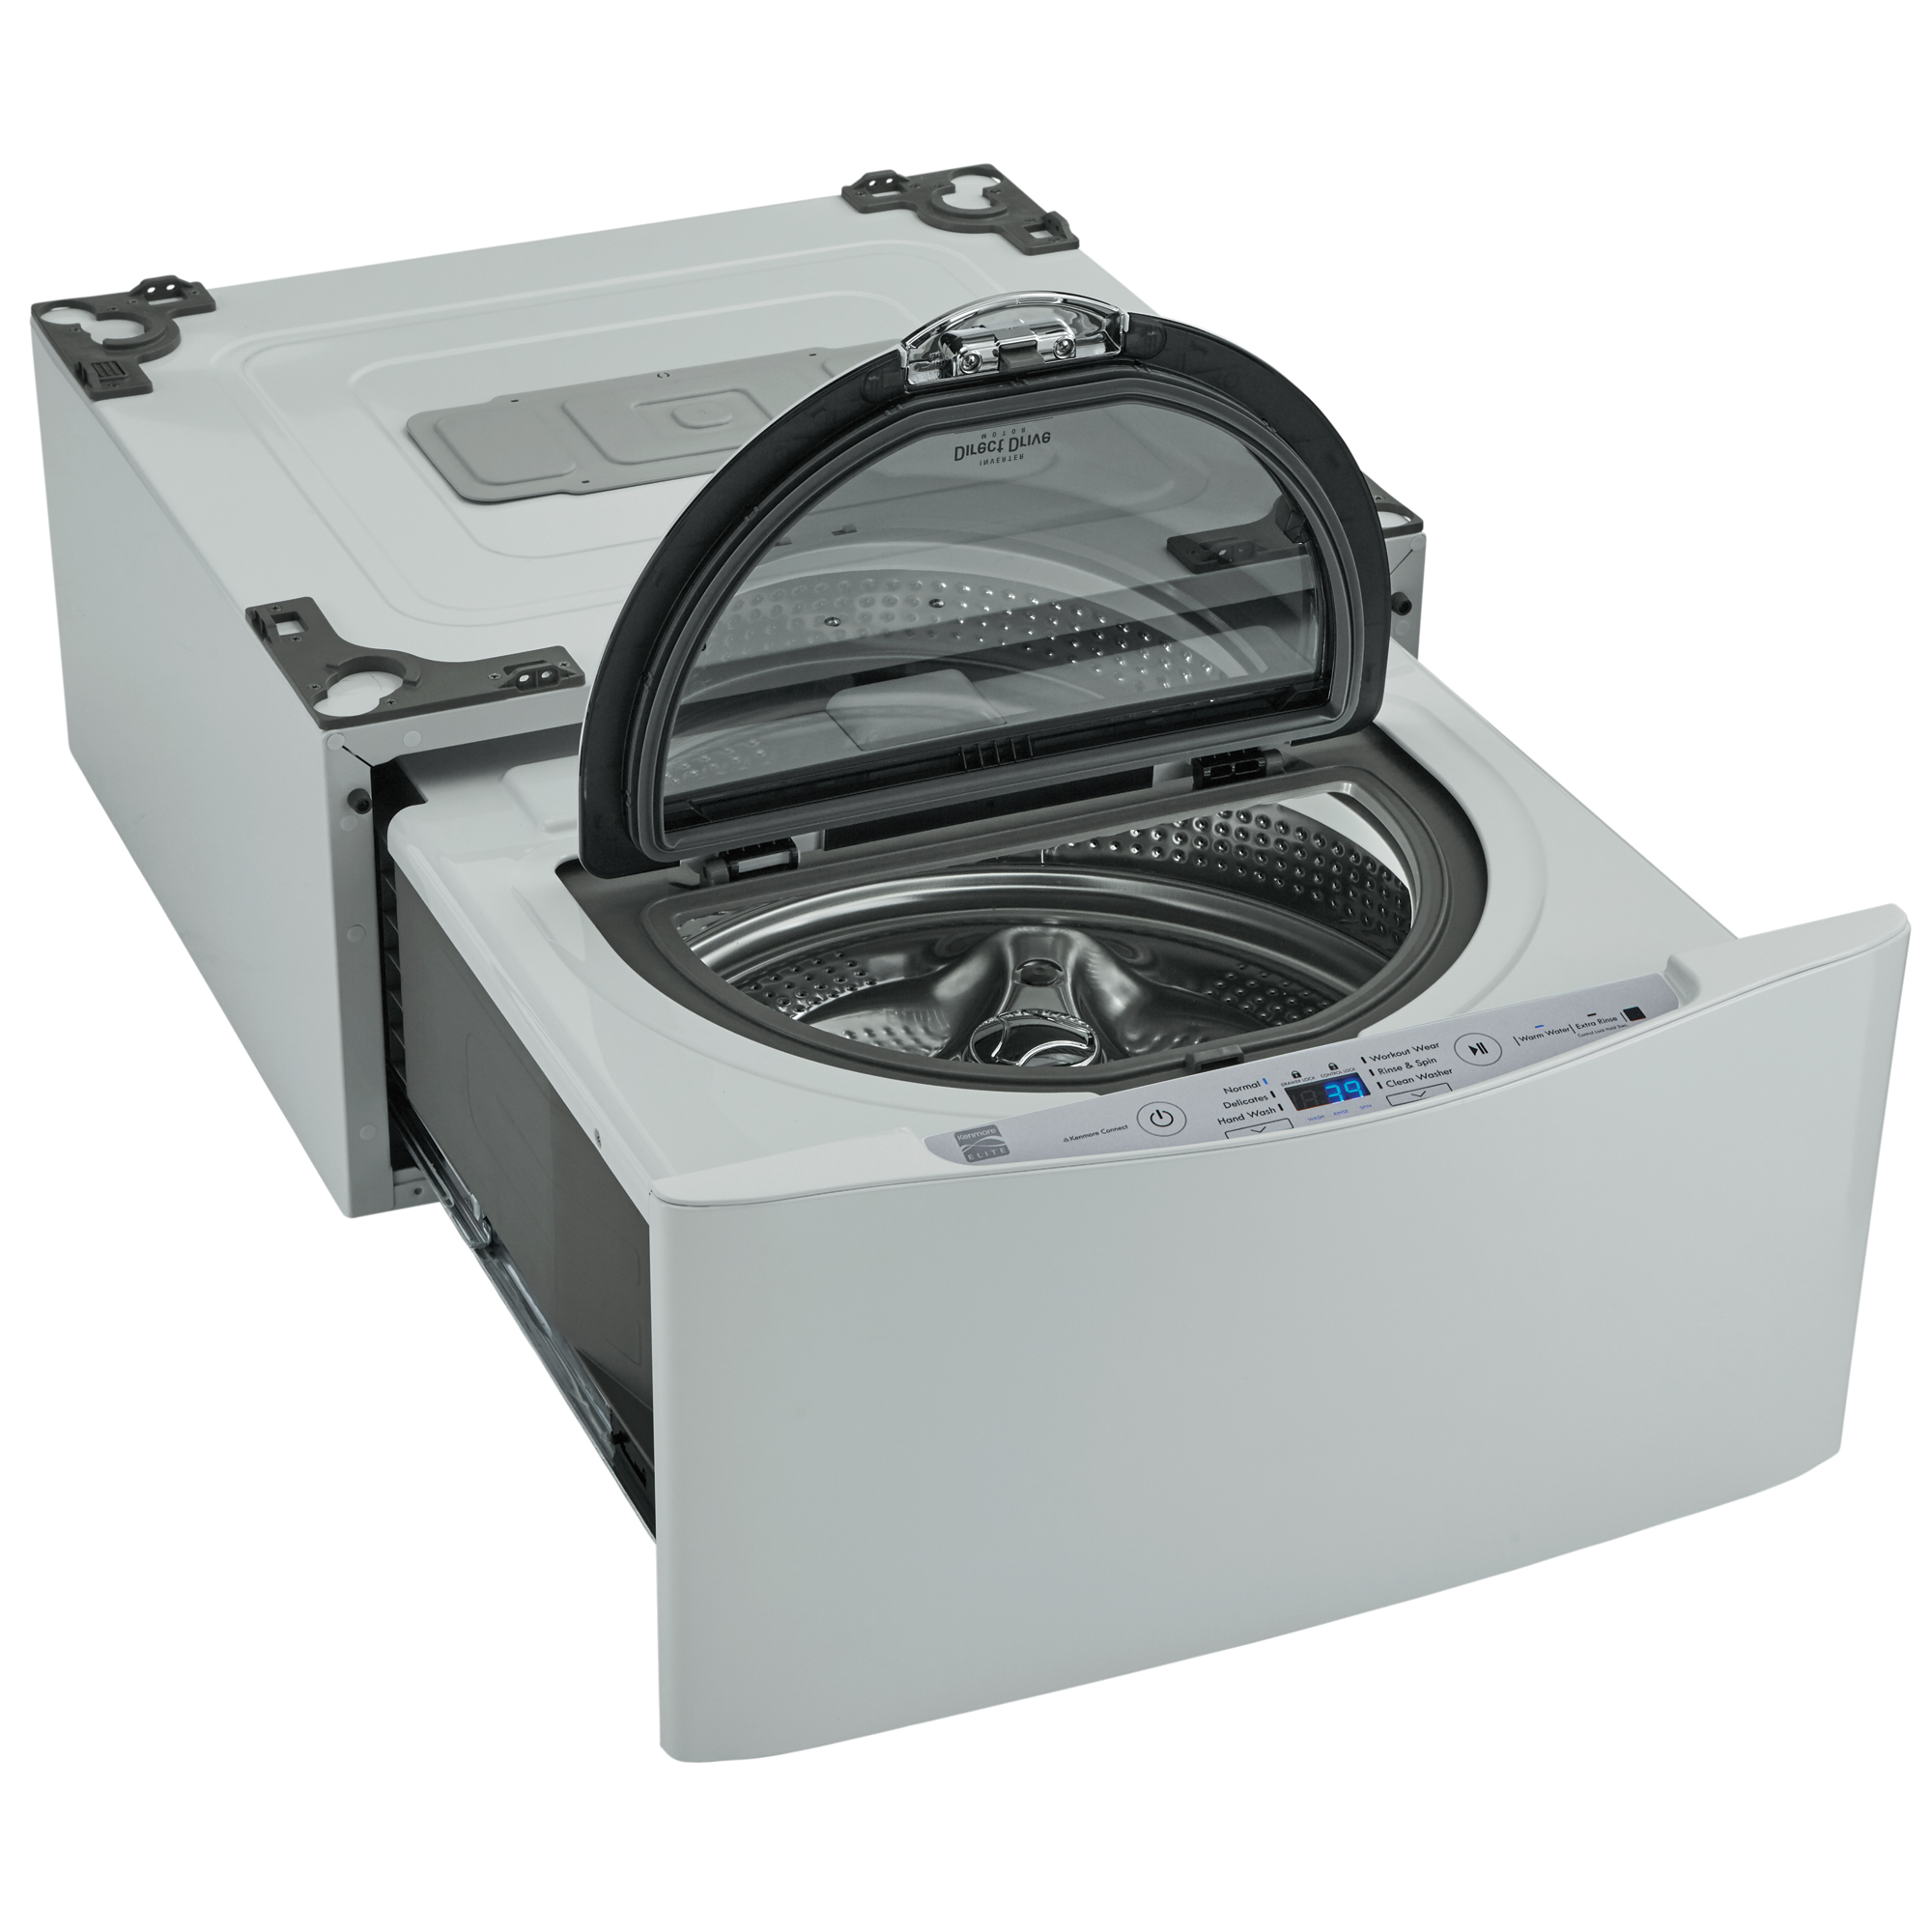 Will Lg Washer Fit On Kenmore Pedestal